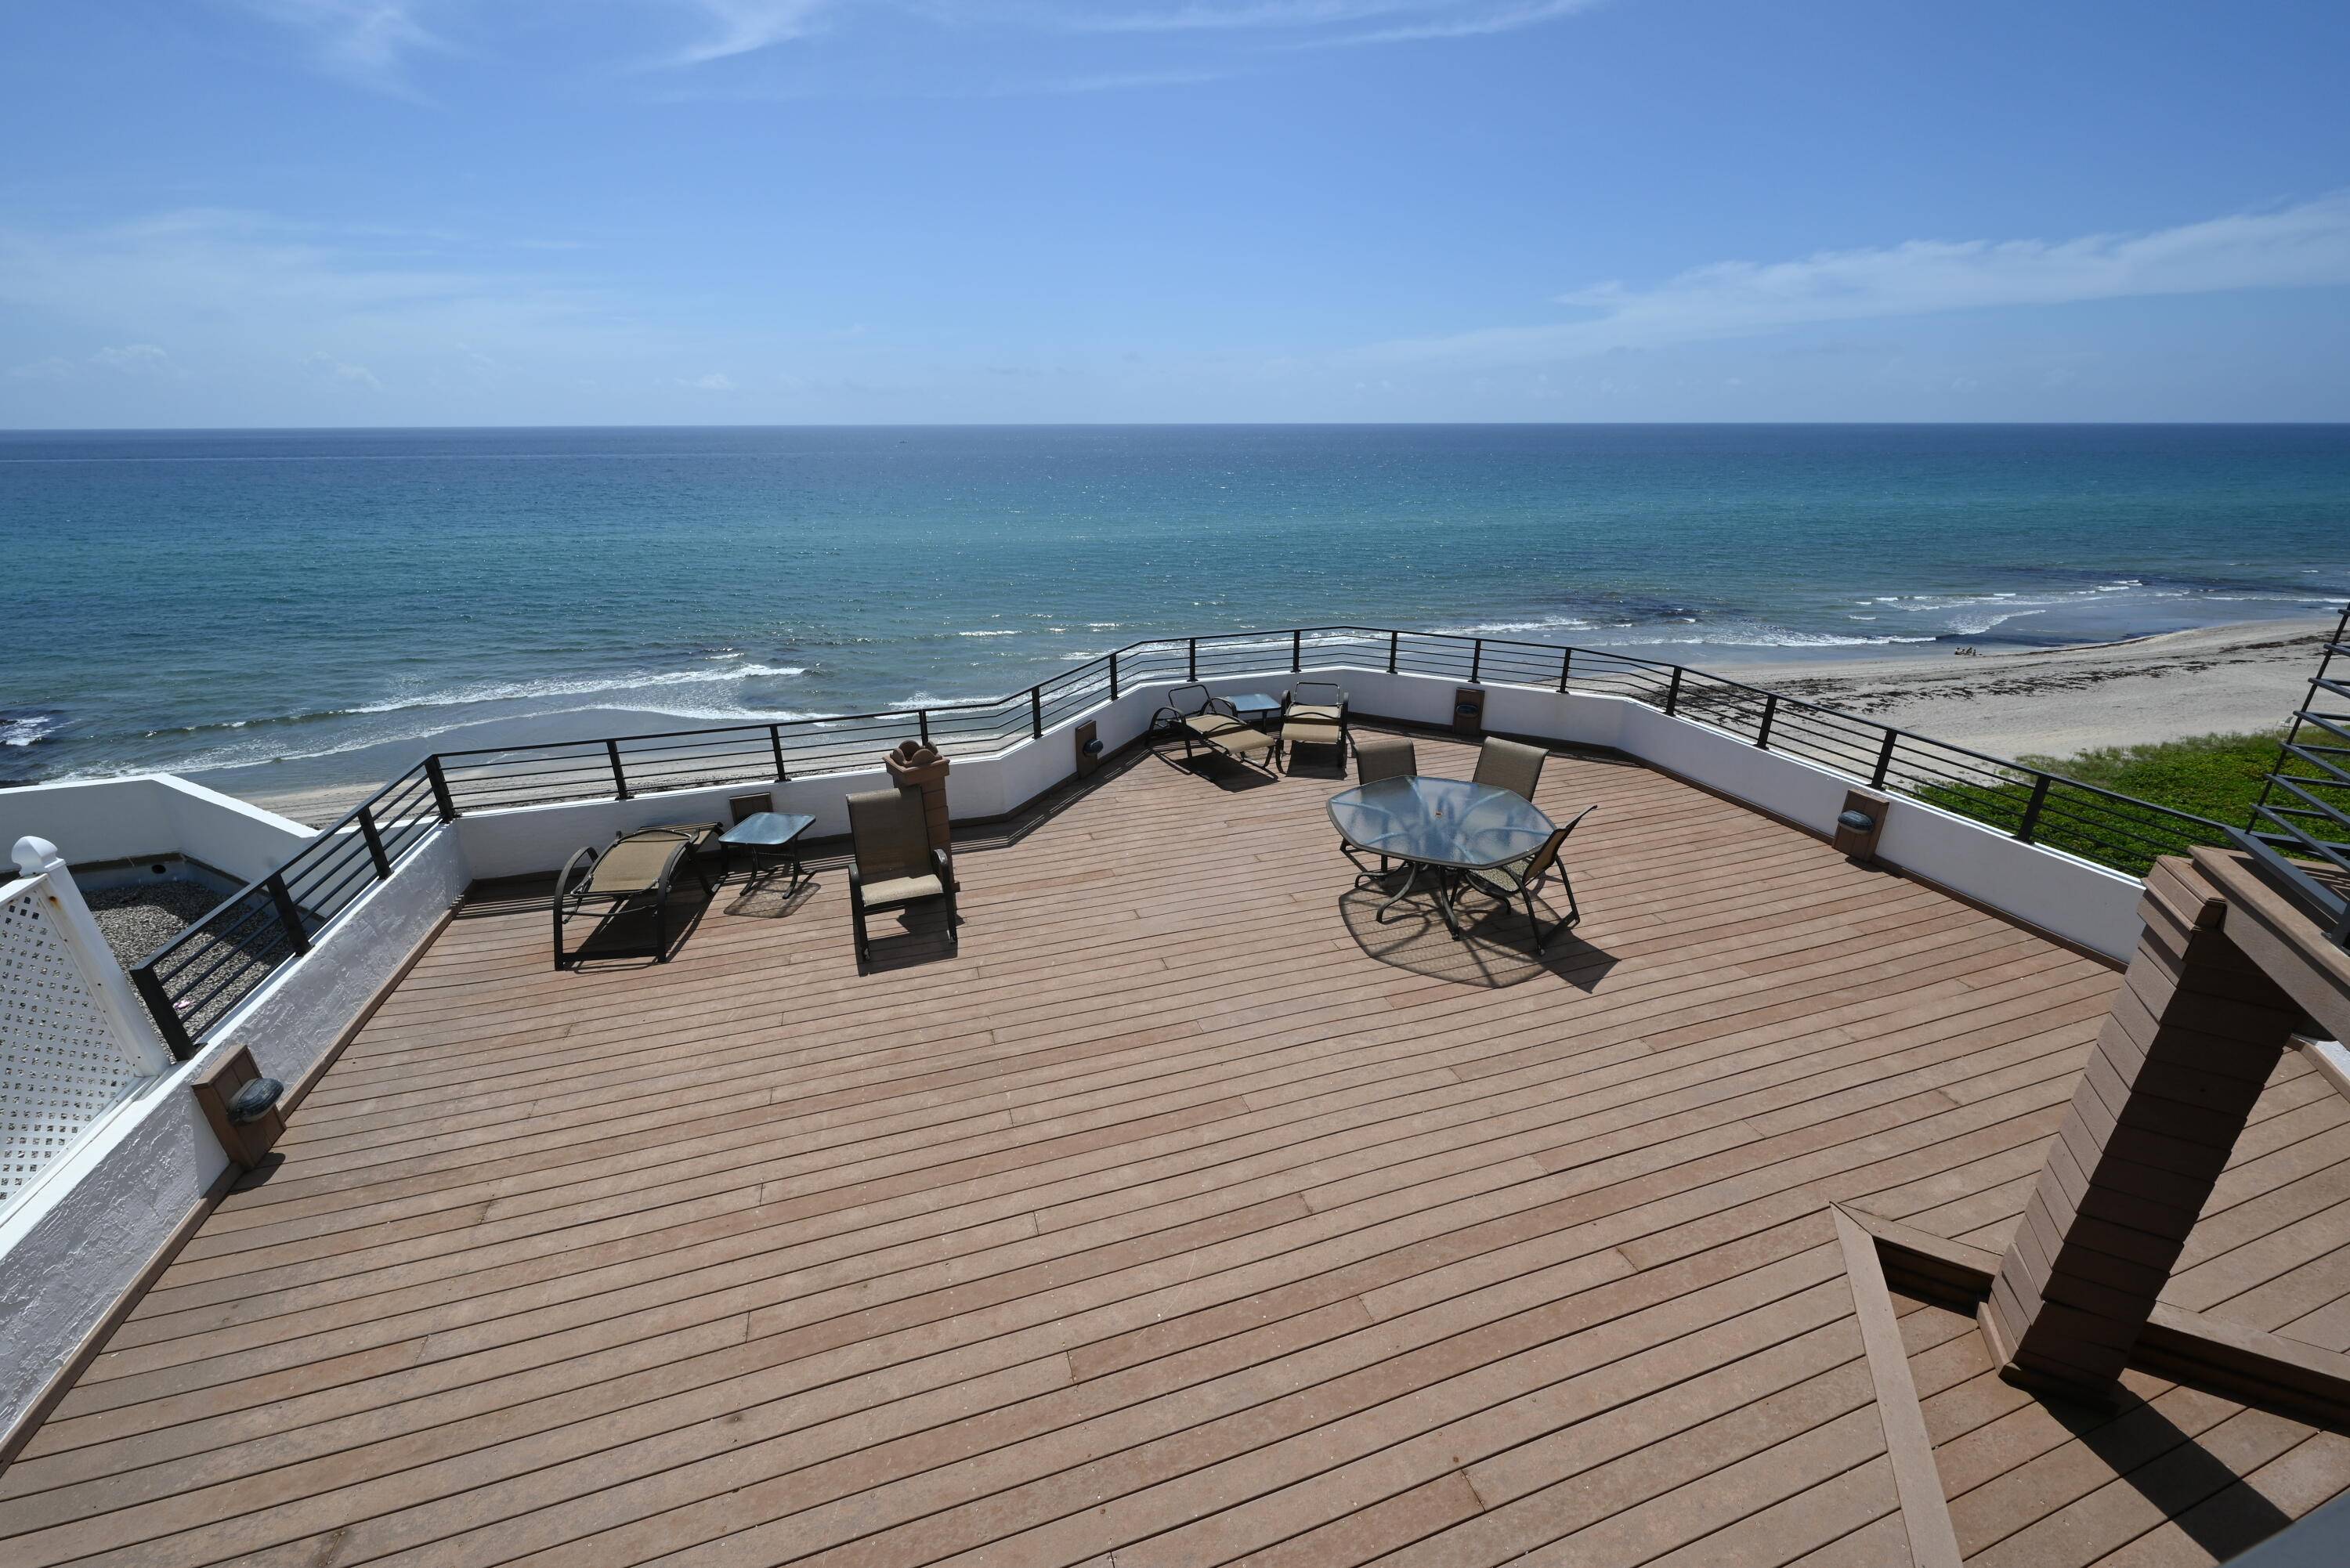 Available March 1, 2022. Dream Direct Oceanfront Penthouse Condo in Highland Beach including a private 1450 Sf Balcony overlooking miles of coast line North and South.